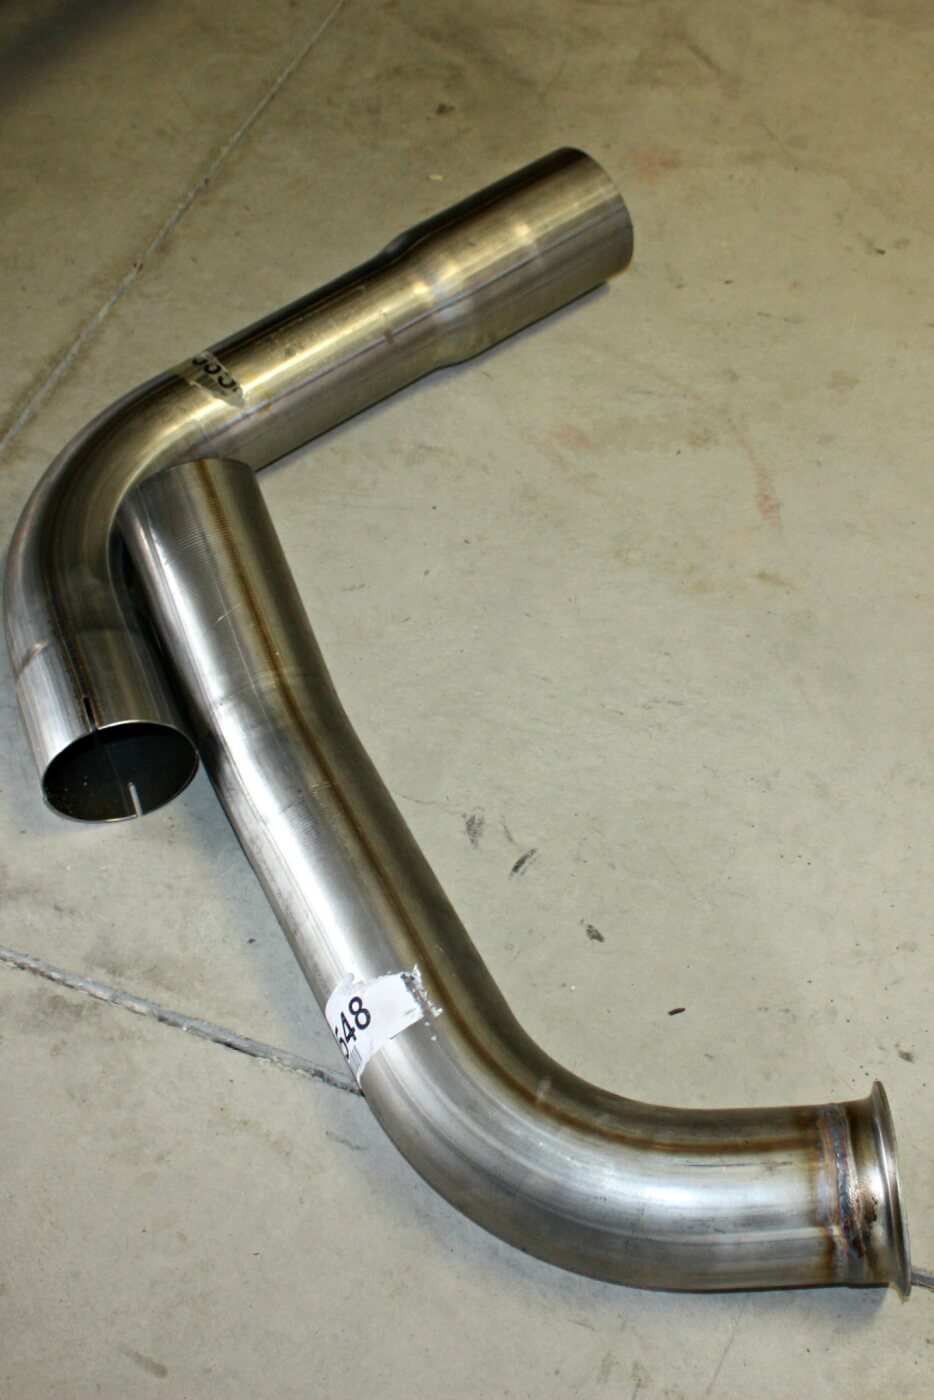 6. The unique mandrel bent two piece 3.5” turbine outlet pipe used in the Monster Exhaust kit makes for an easy installation with ample room between the engine and cab firewall. The 3.5” diameter helps maximize the drive pressure within the engine for the best torque and power curve, improving towing performance.